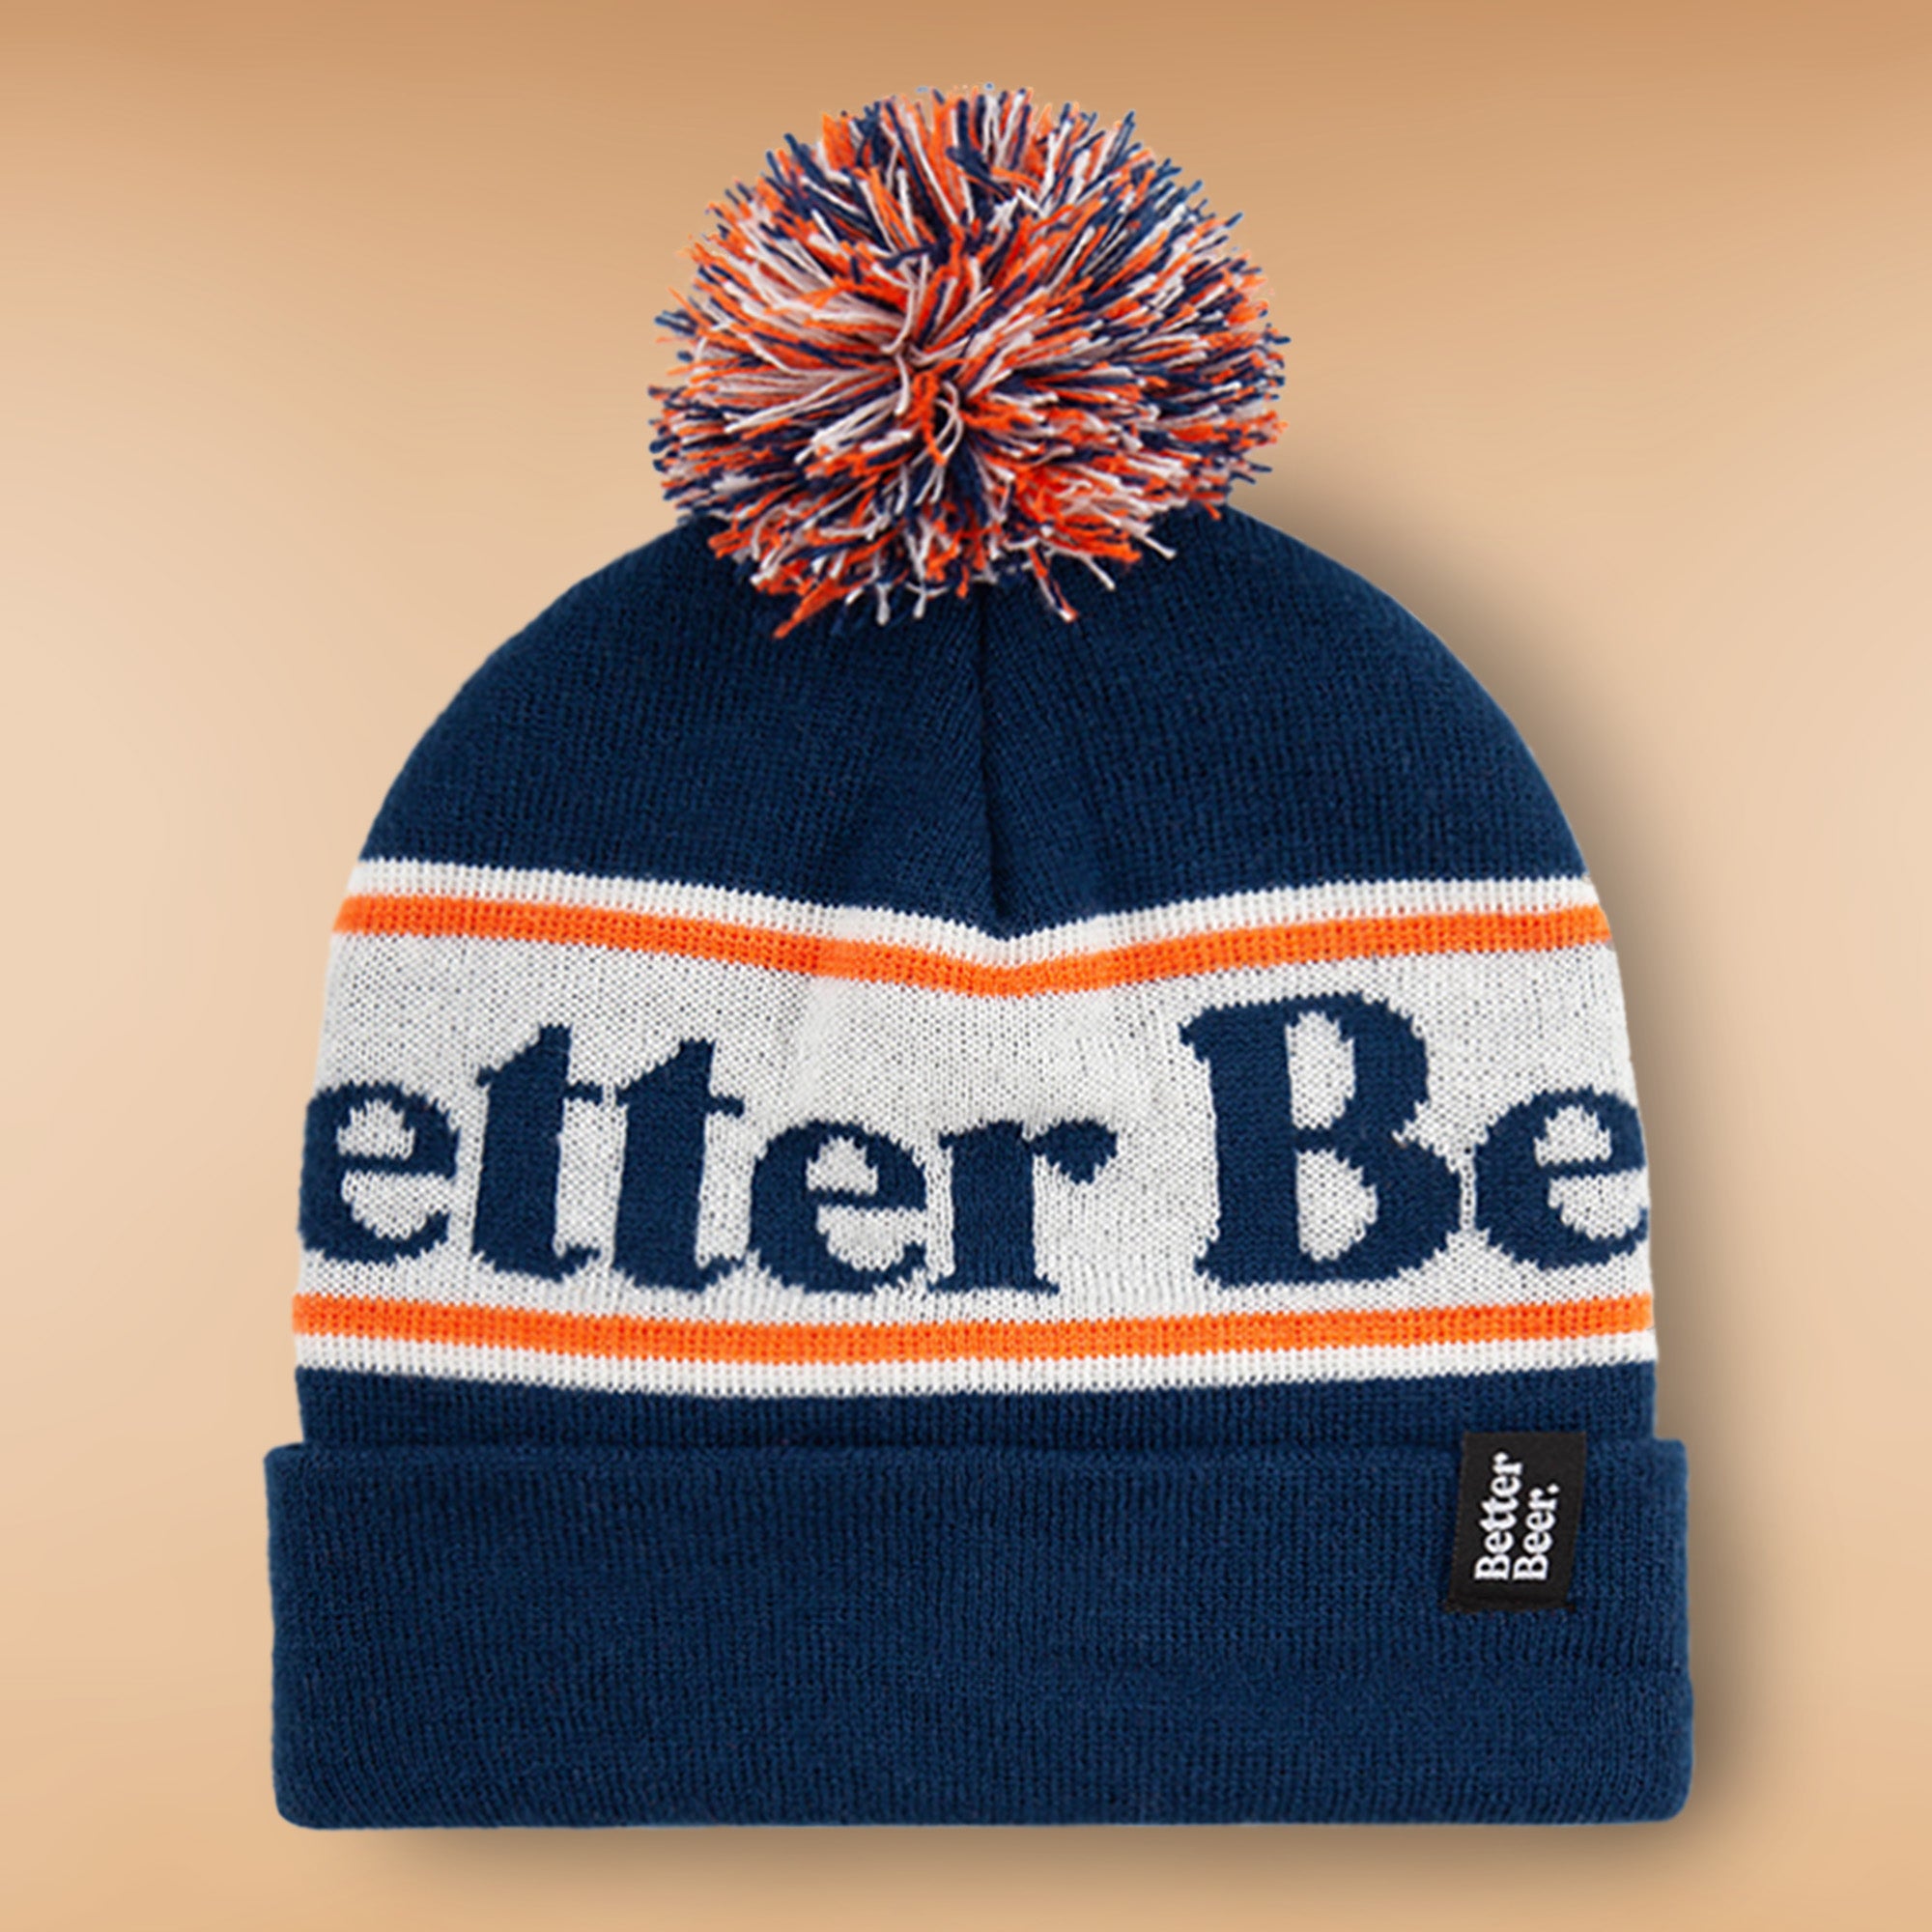 Better Beer Pom Pom Beanies front view